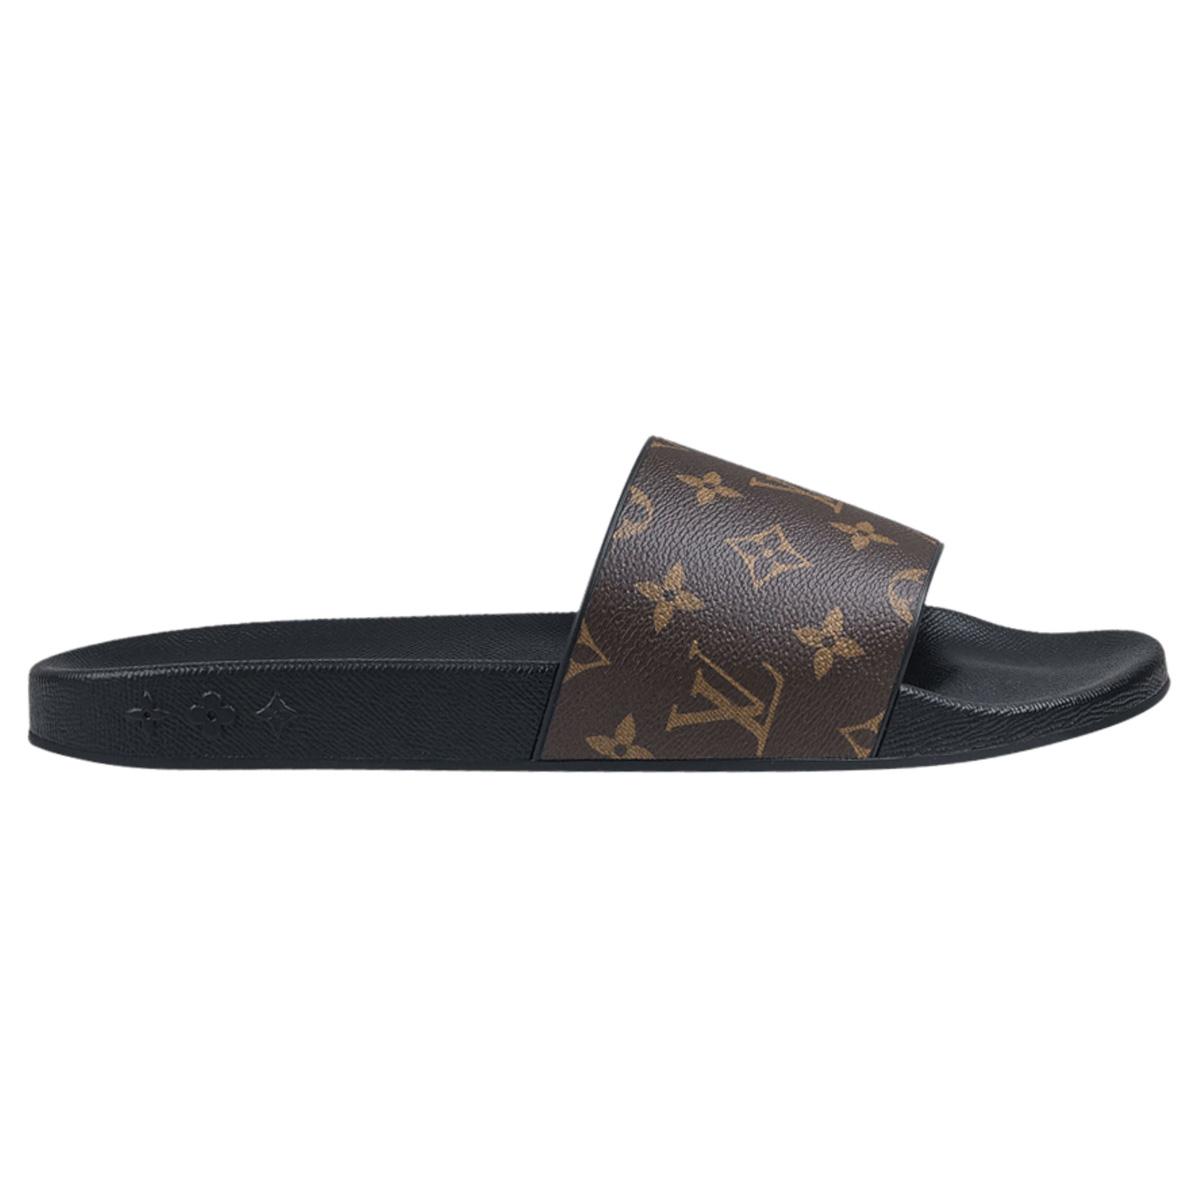 5kempirefashionstore - Louis Vuitton slides Available in size 40